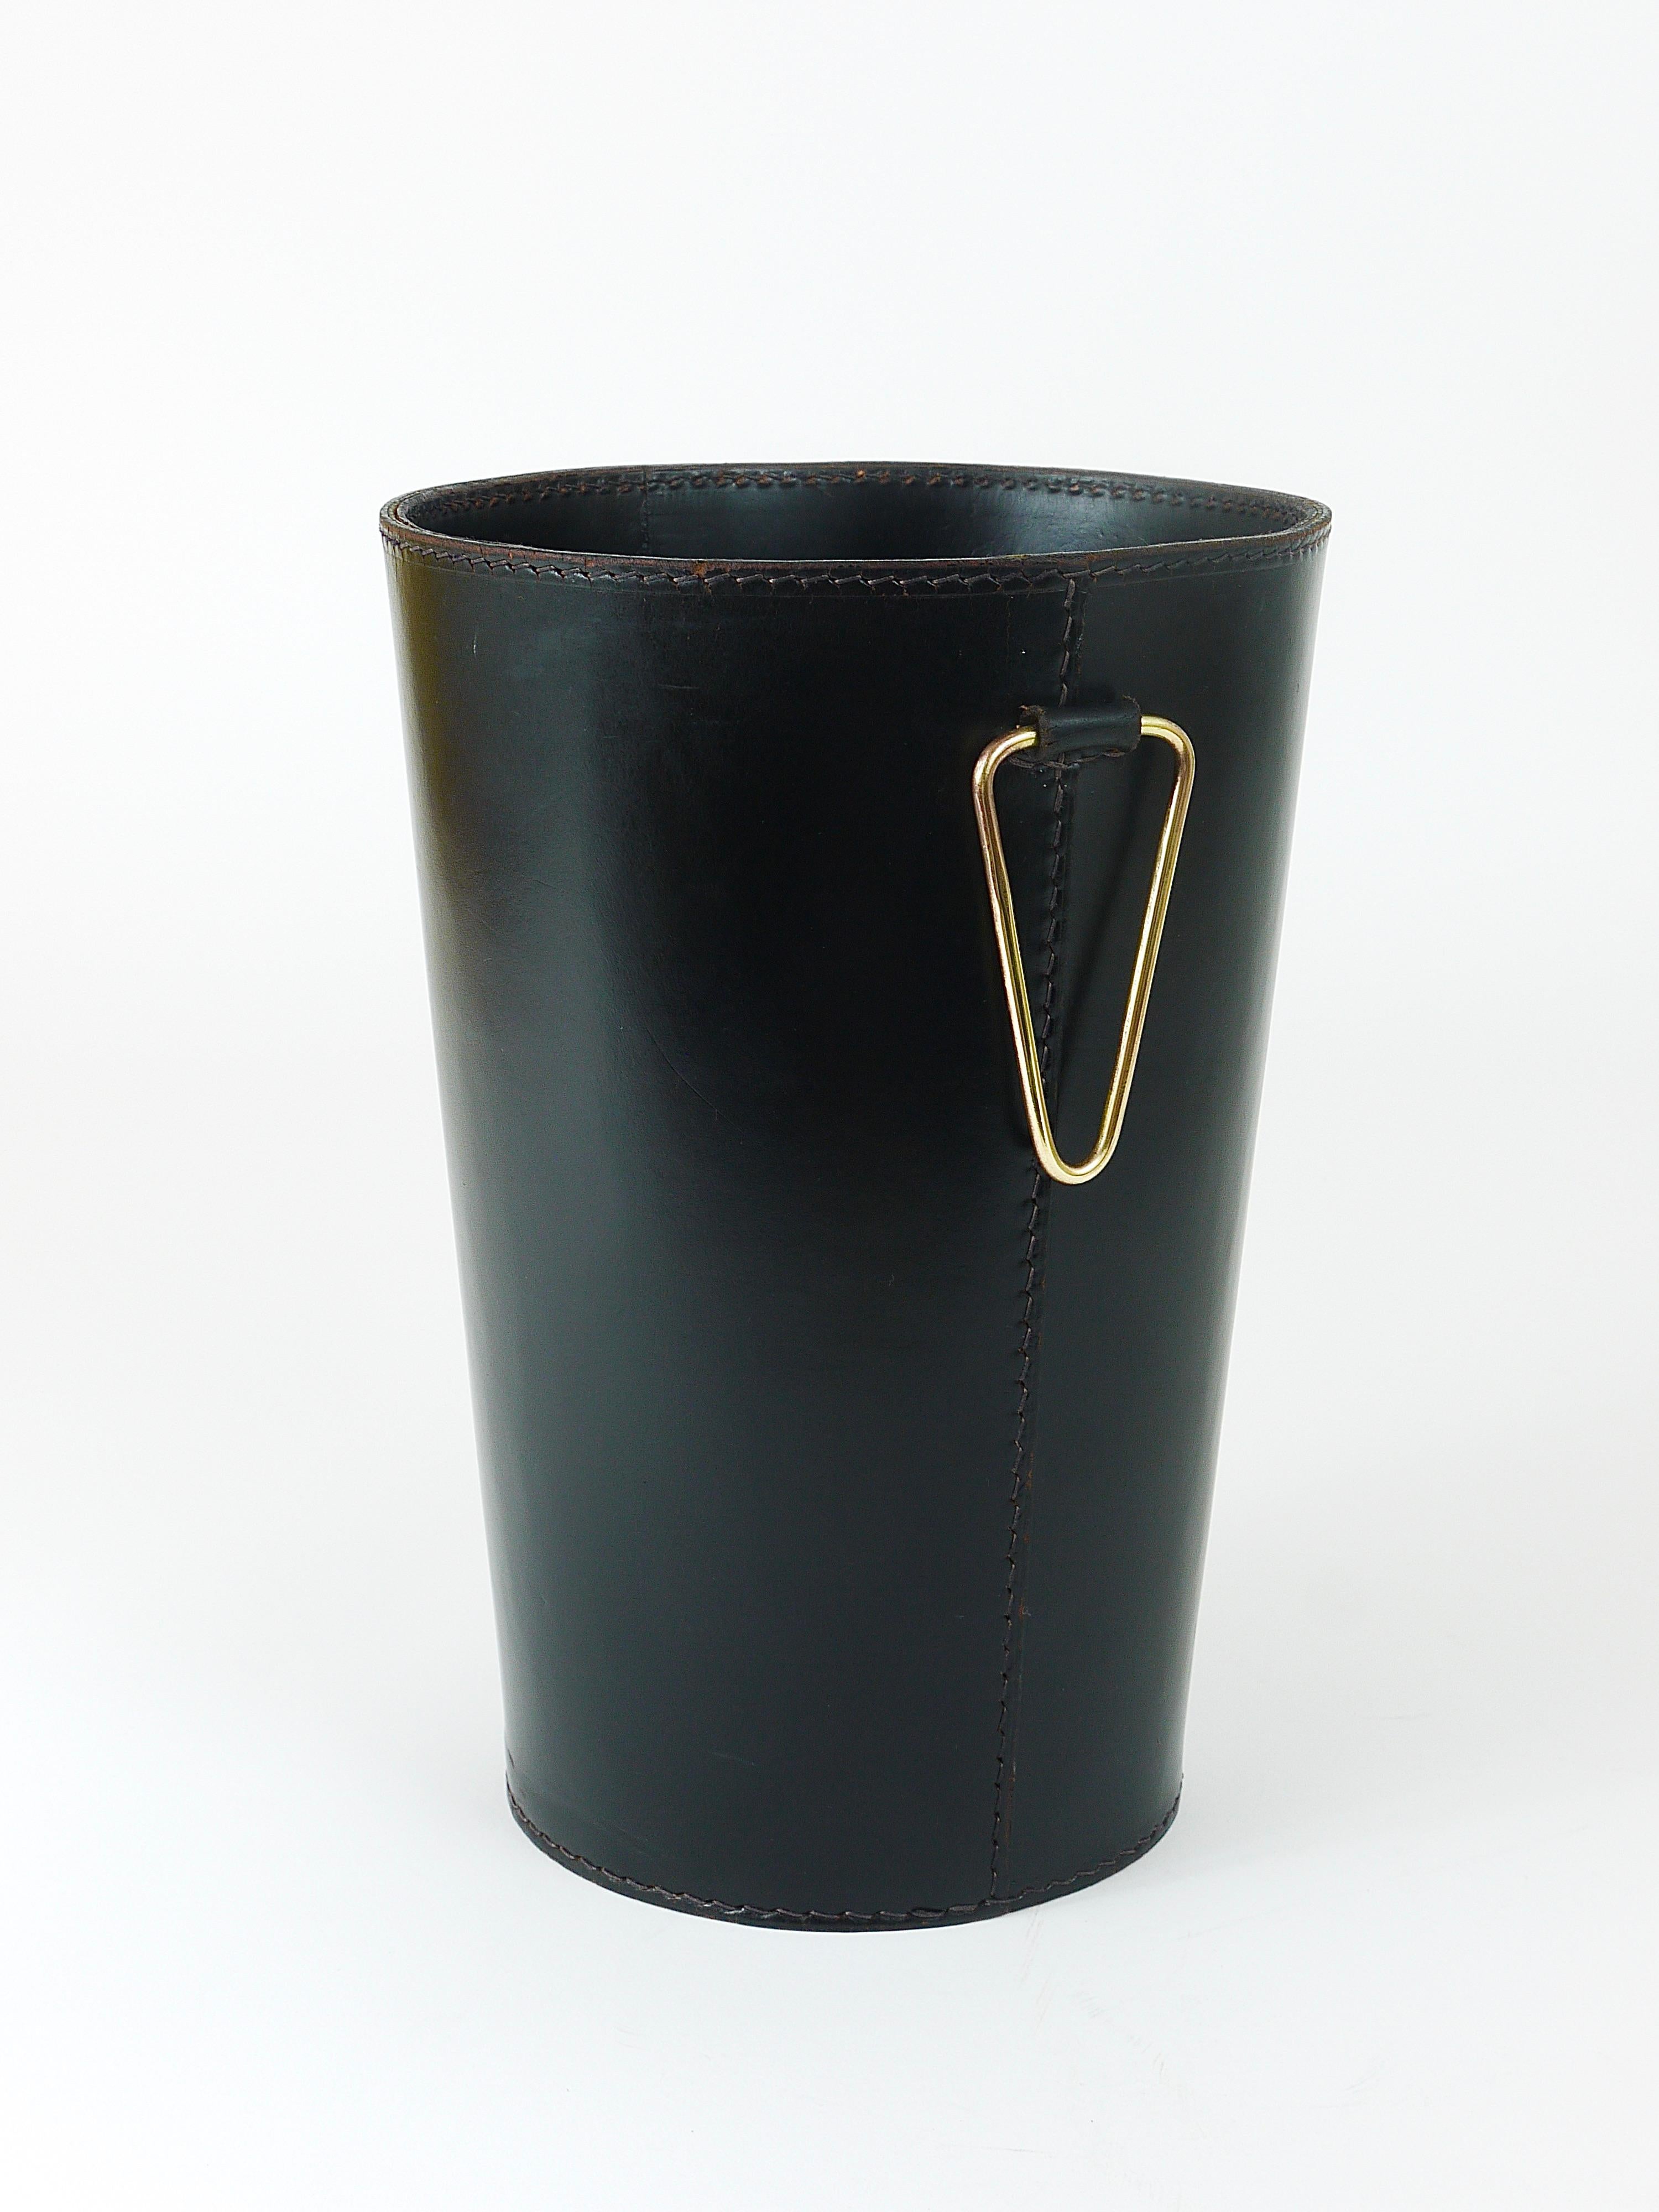 Hand-Crafted Mid-Century Carl Auböck Black Leather & Brass Wastepaper Basket, Austria, 1950s For Sale